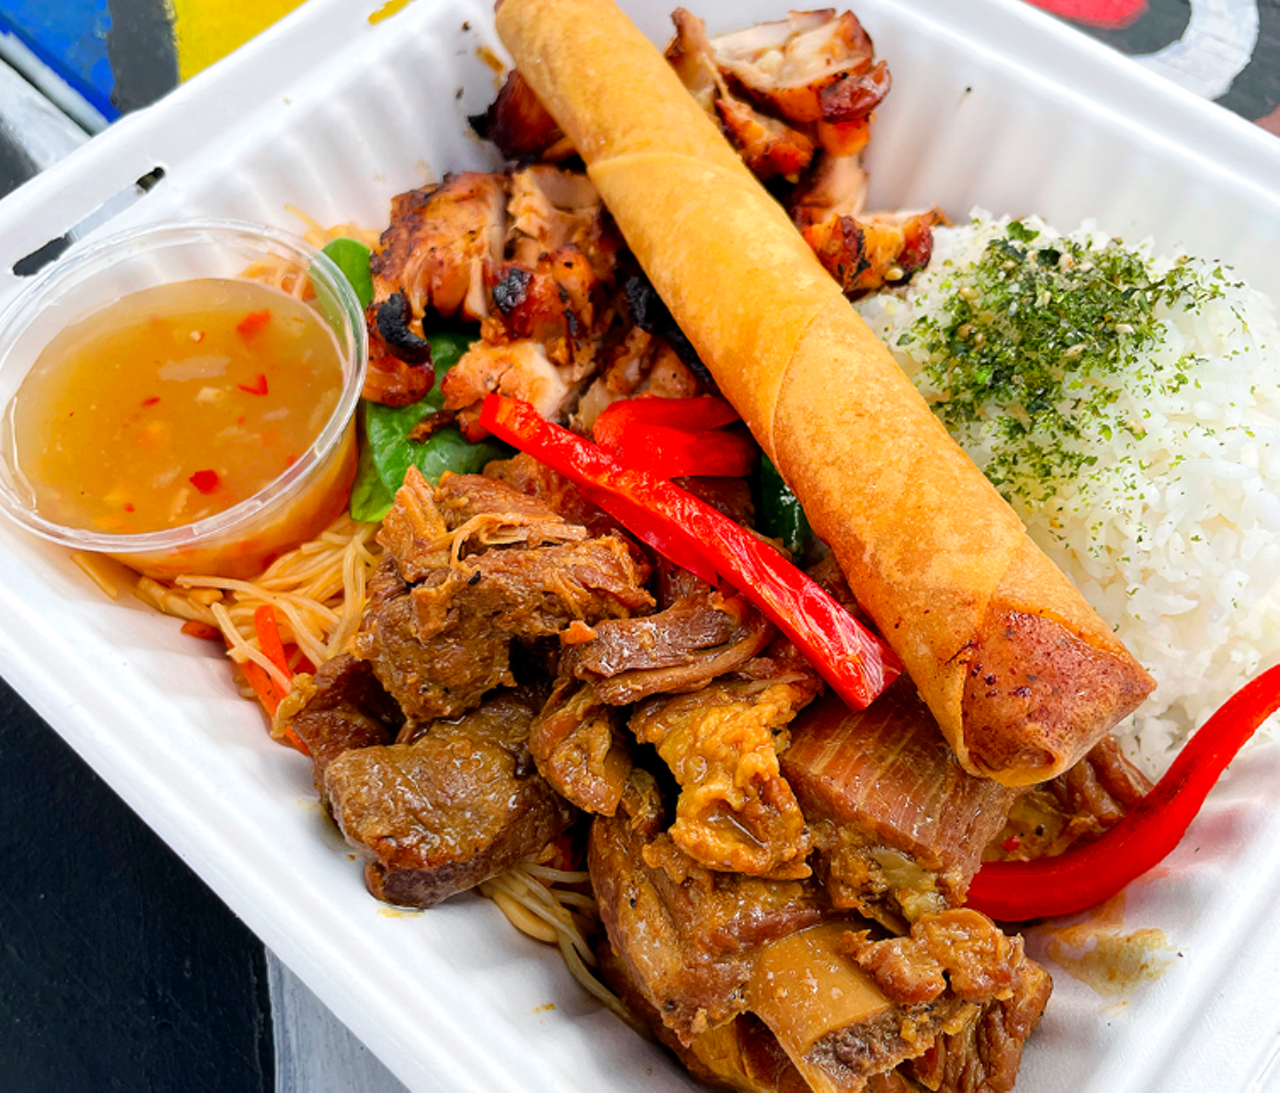 OverRice
1084 Lee Road, Orlando
The longtime food truck op is another in a line of mobile purveyors going brick-and-mortar this year. Apart from Pinoy staples like pork adobo, lumpia and pancit, chef-owners Mayra and Joel Paoner cook up a bevy of Hawaiian classics like kalua pork and chicken katsu. 
Photo via OverRice/Facebook